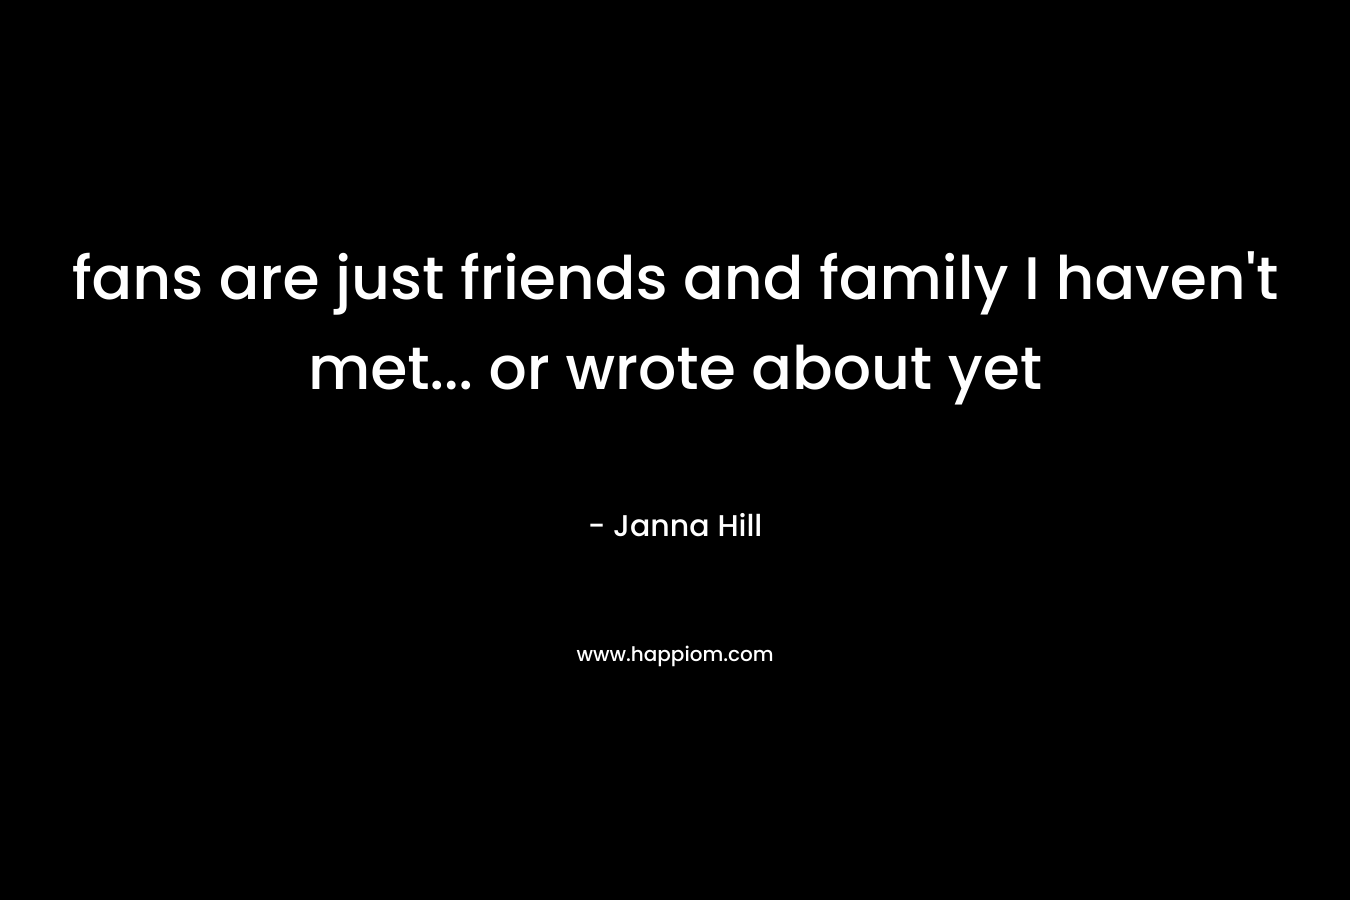 fans are just friends and family I haven't met... or wrote about yet